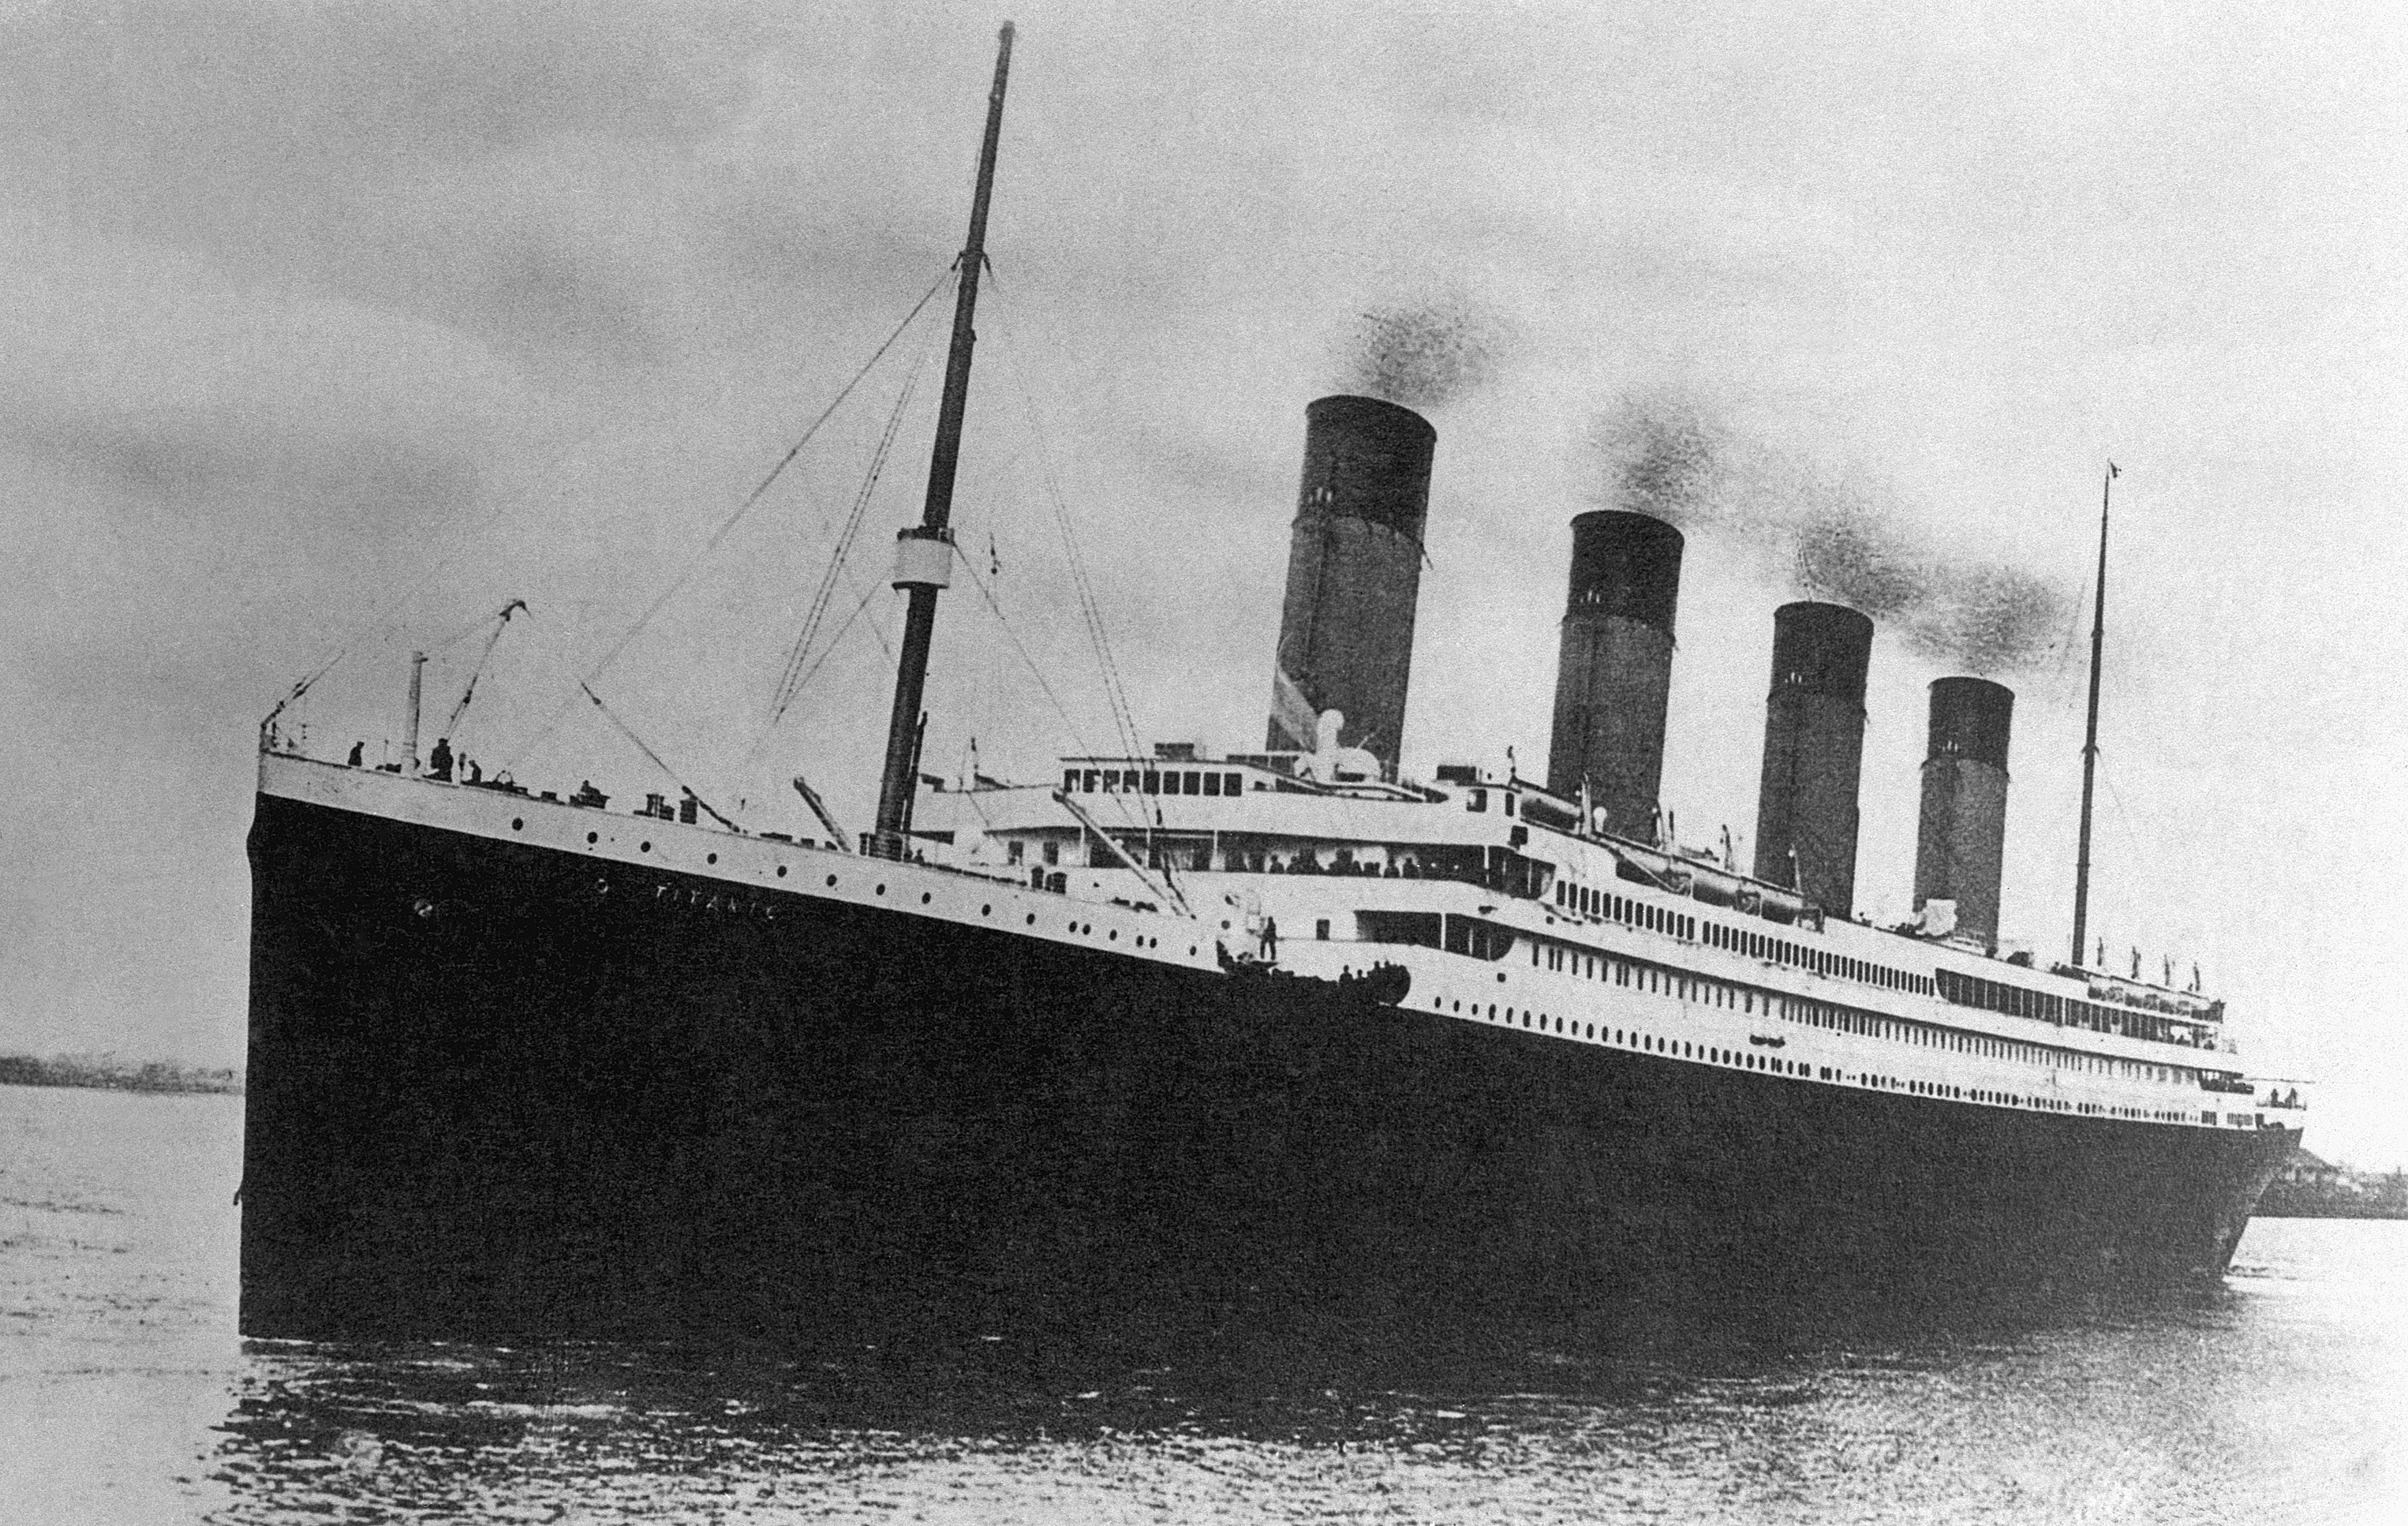 3052x1934 Chilling Video Shows What Sinking on the Titanic Would Really Look Like